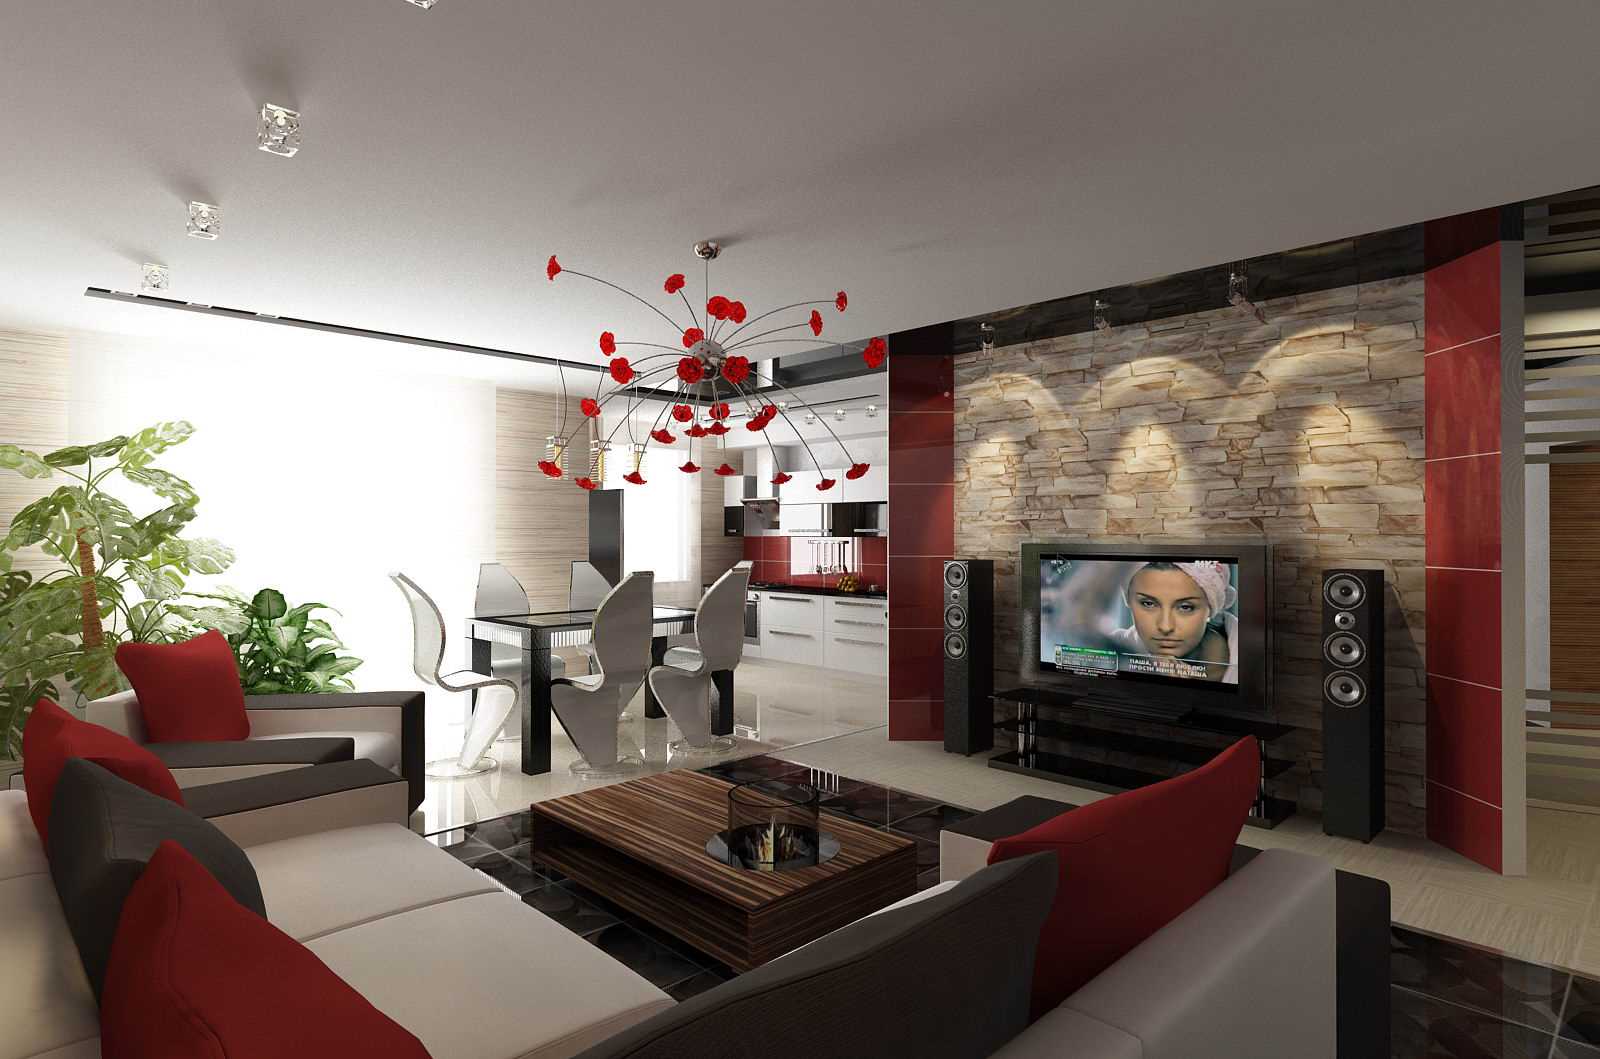 option of a bright decor of the living room in a modern style